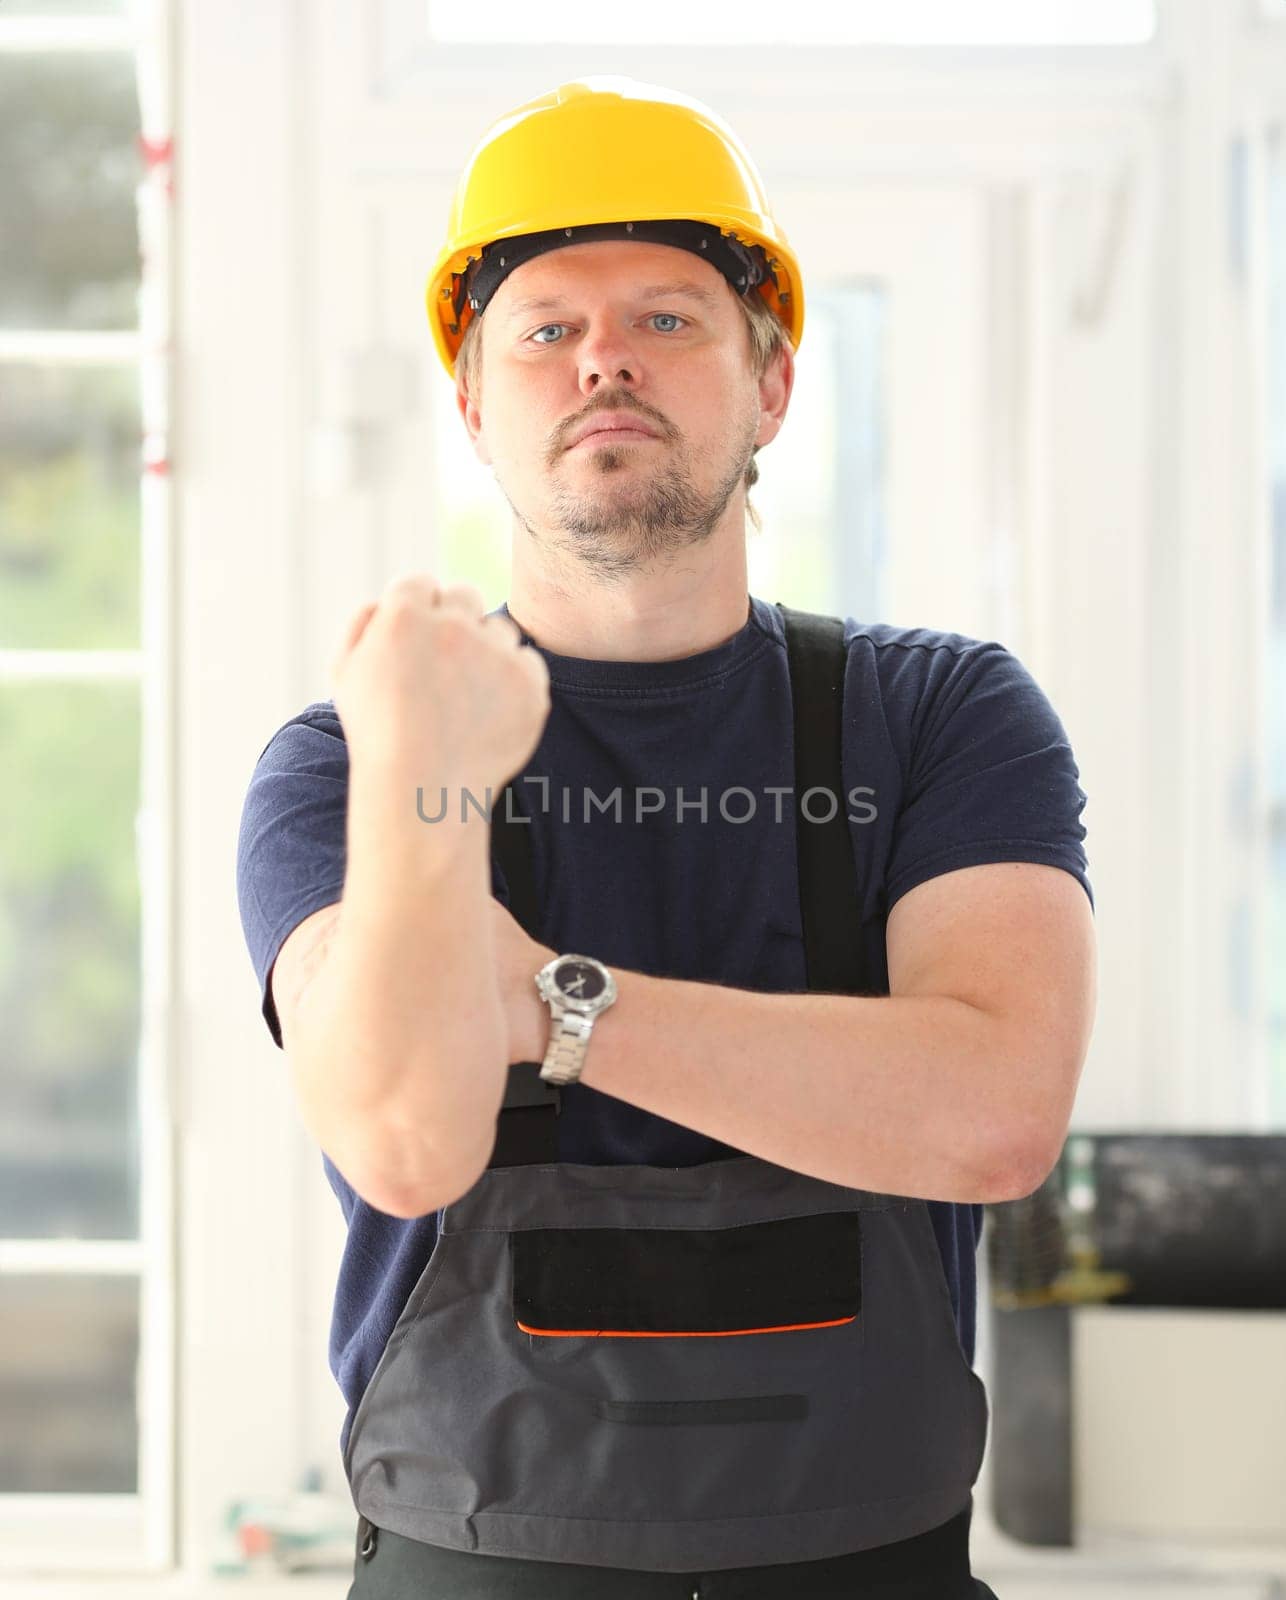 Smiling funny worker in yellow helmet posing. Manual job workplace DIY inspiration improvement fix shop hard hat joinery startup idea industrial education profession career concept